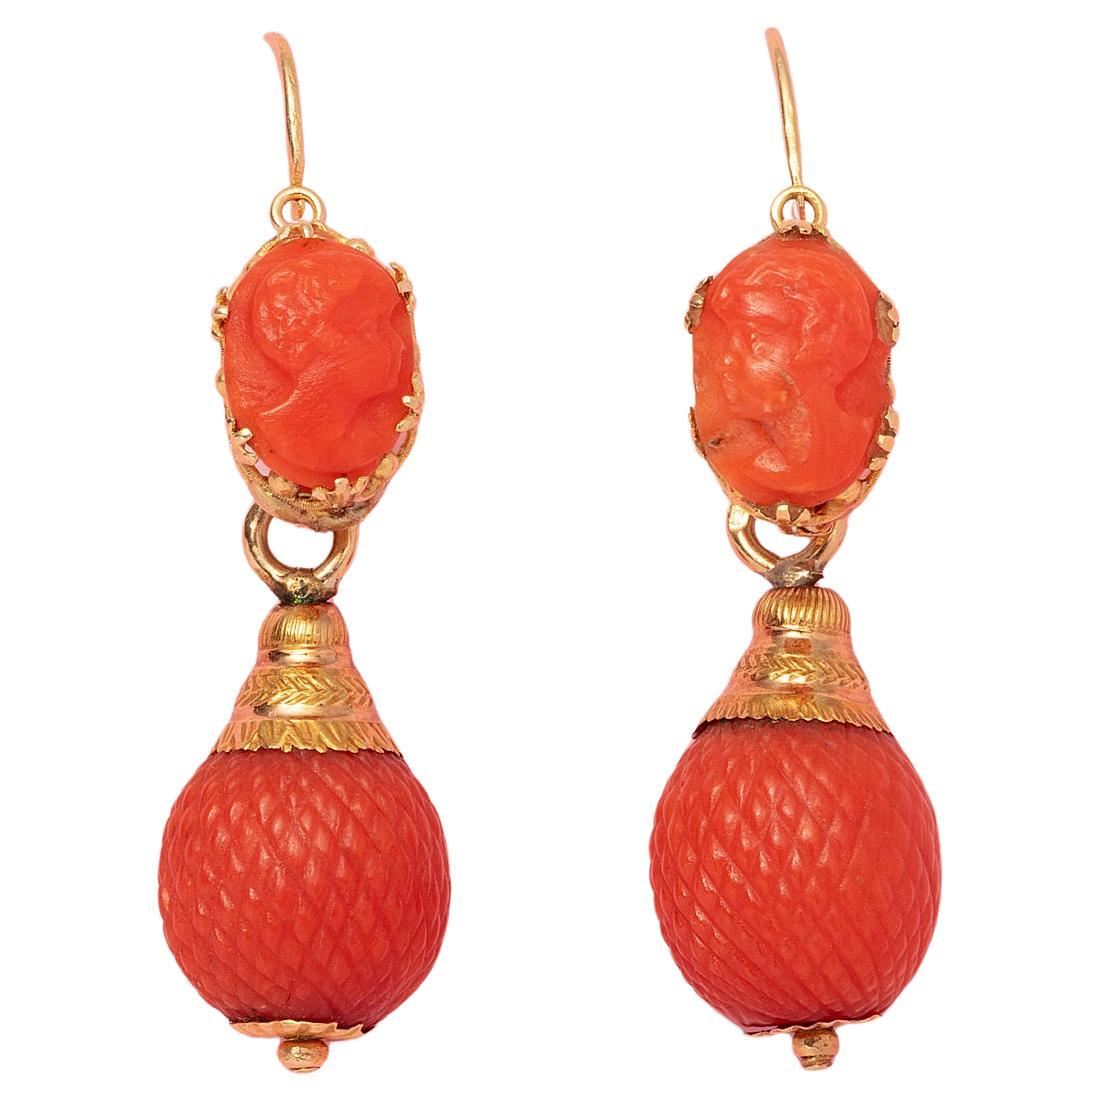 A Pair of 18 Carat Gold and Coral Gergian Day and Night Earrings For Sale